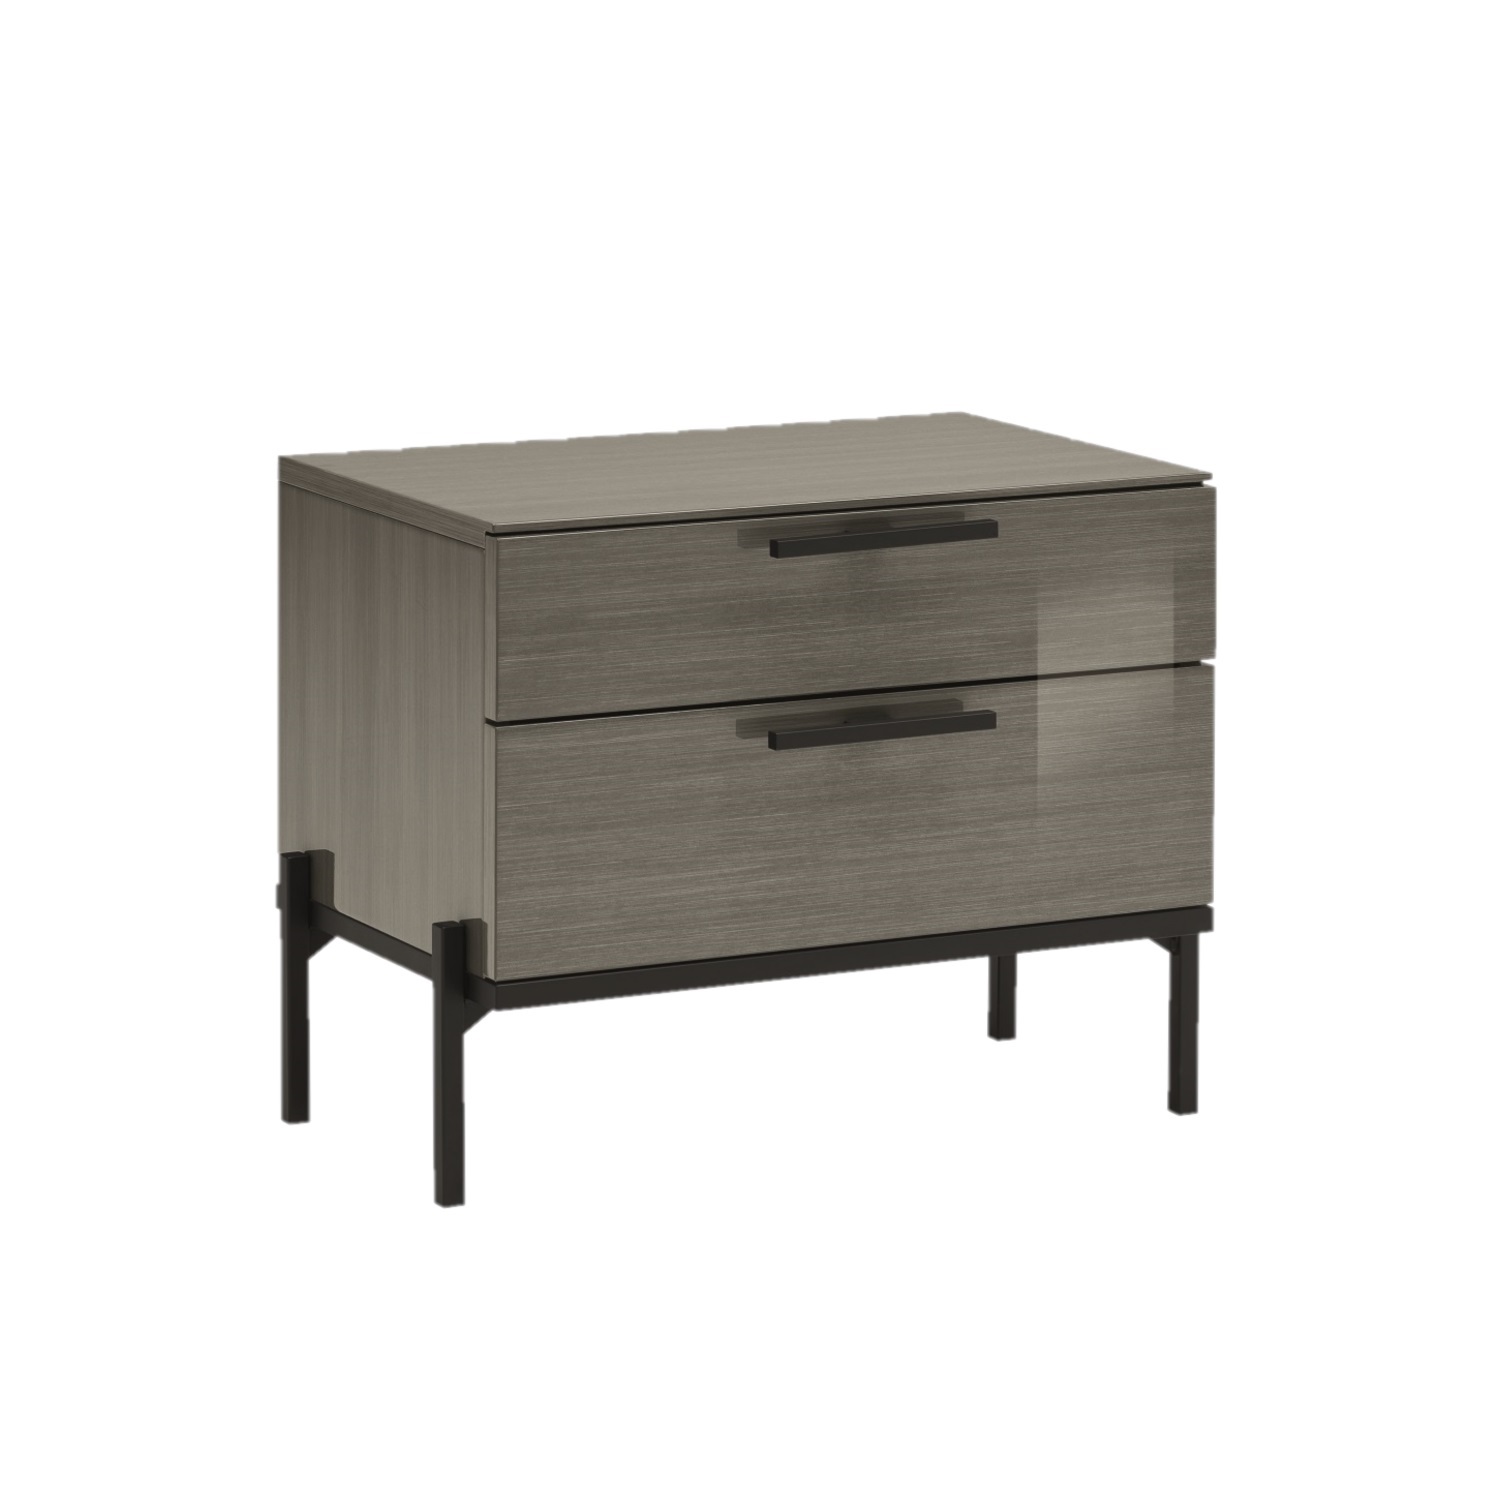 CENTRALE nightstand